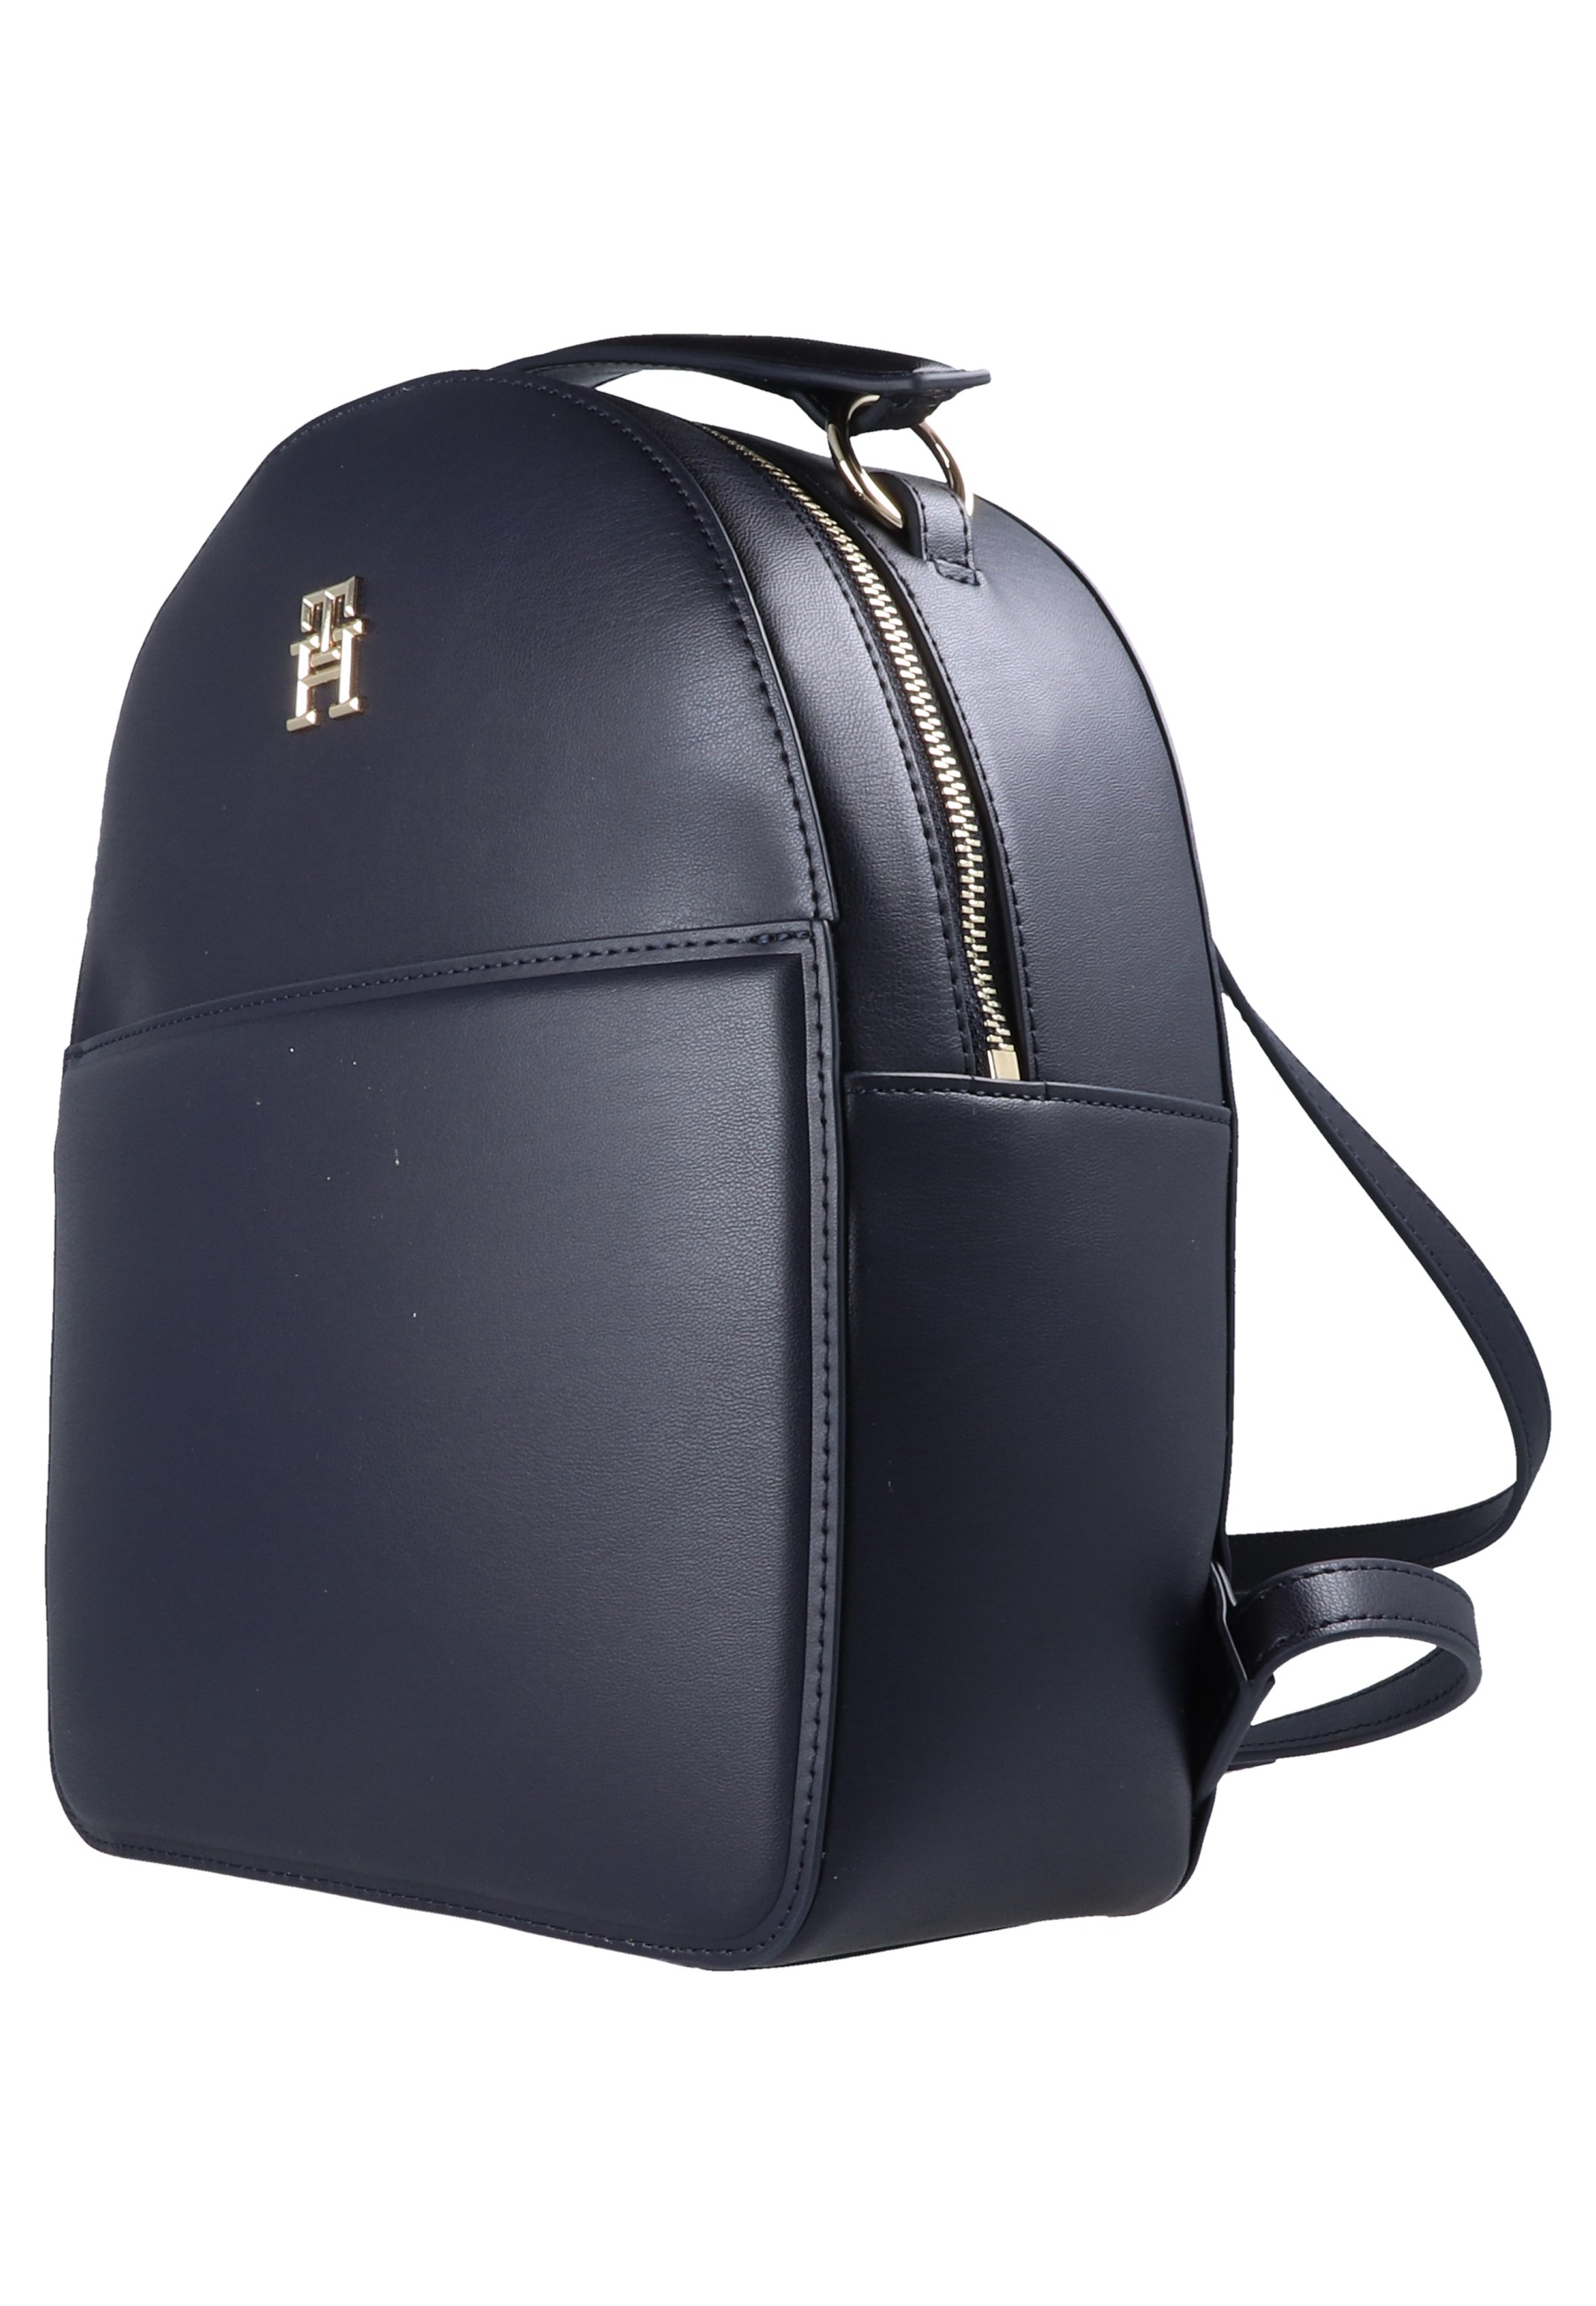 TH CHIC BACKPACK - Rucksack